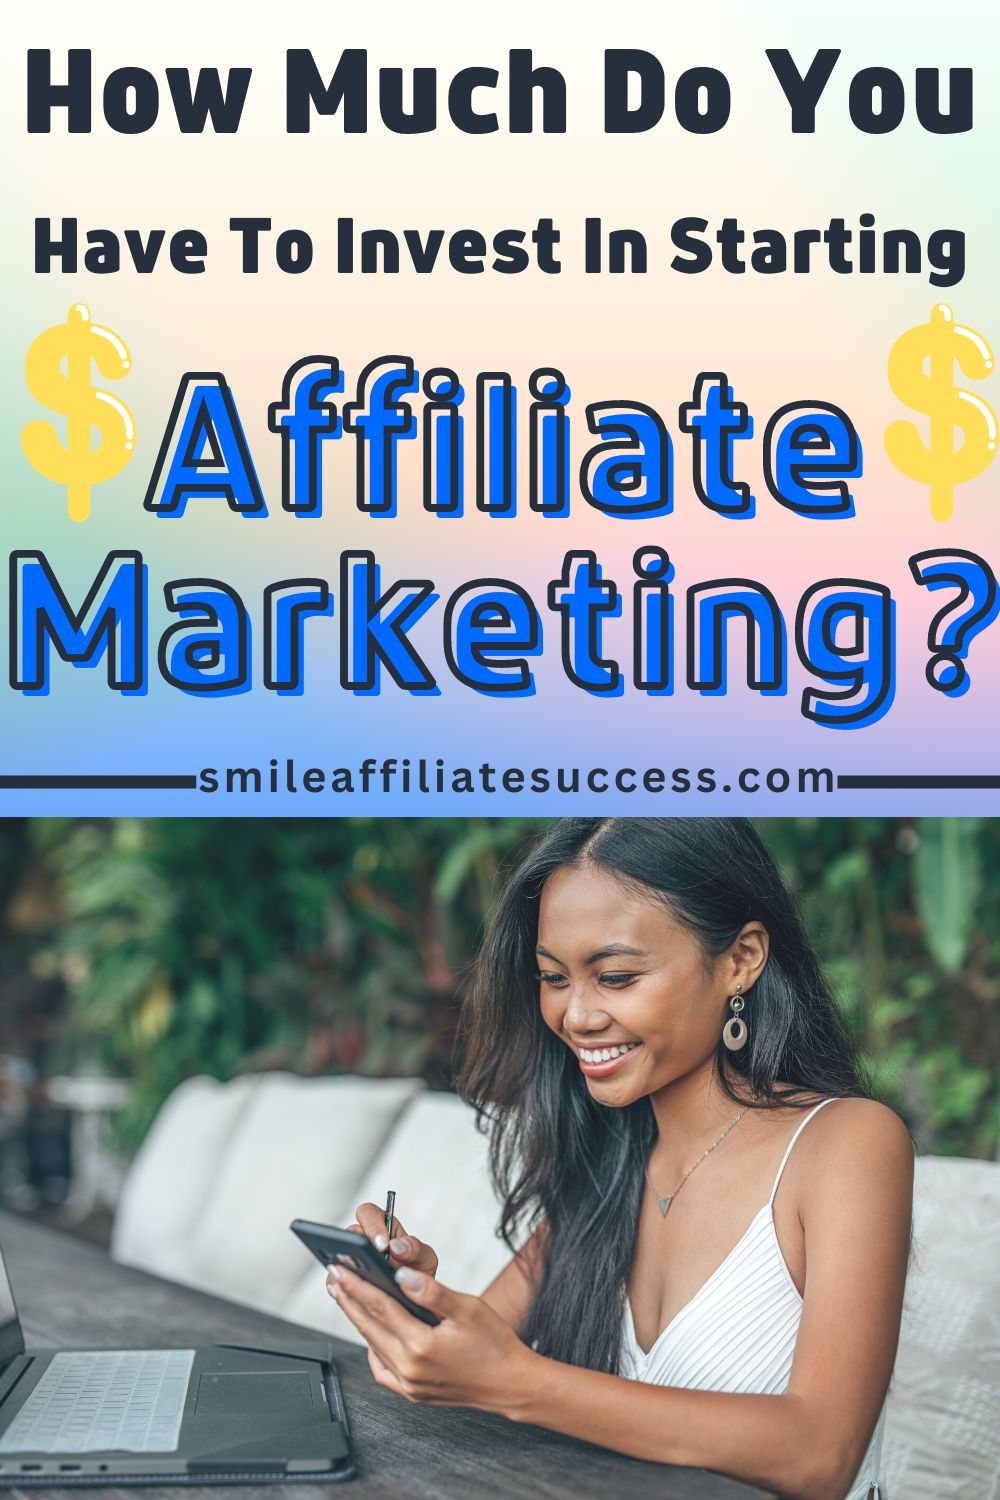 How Much Do You Have To Invest In Starting Affiliate Marketing?